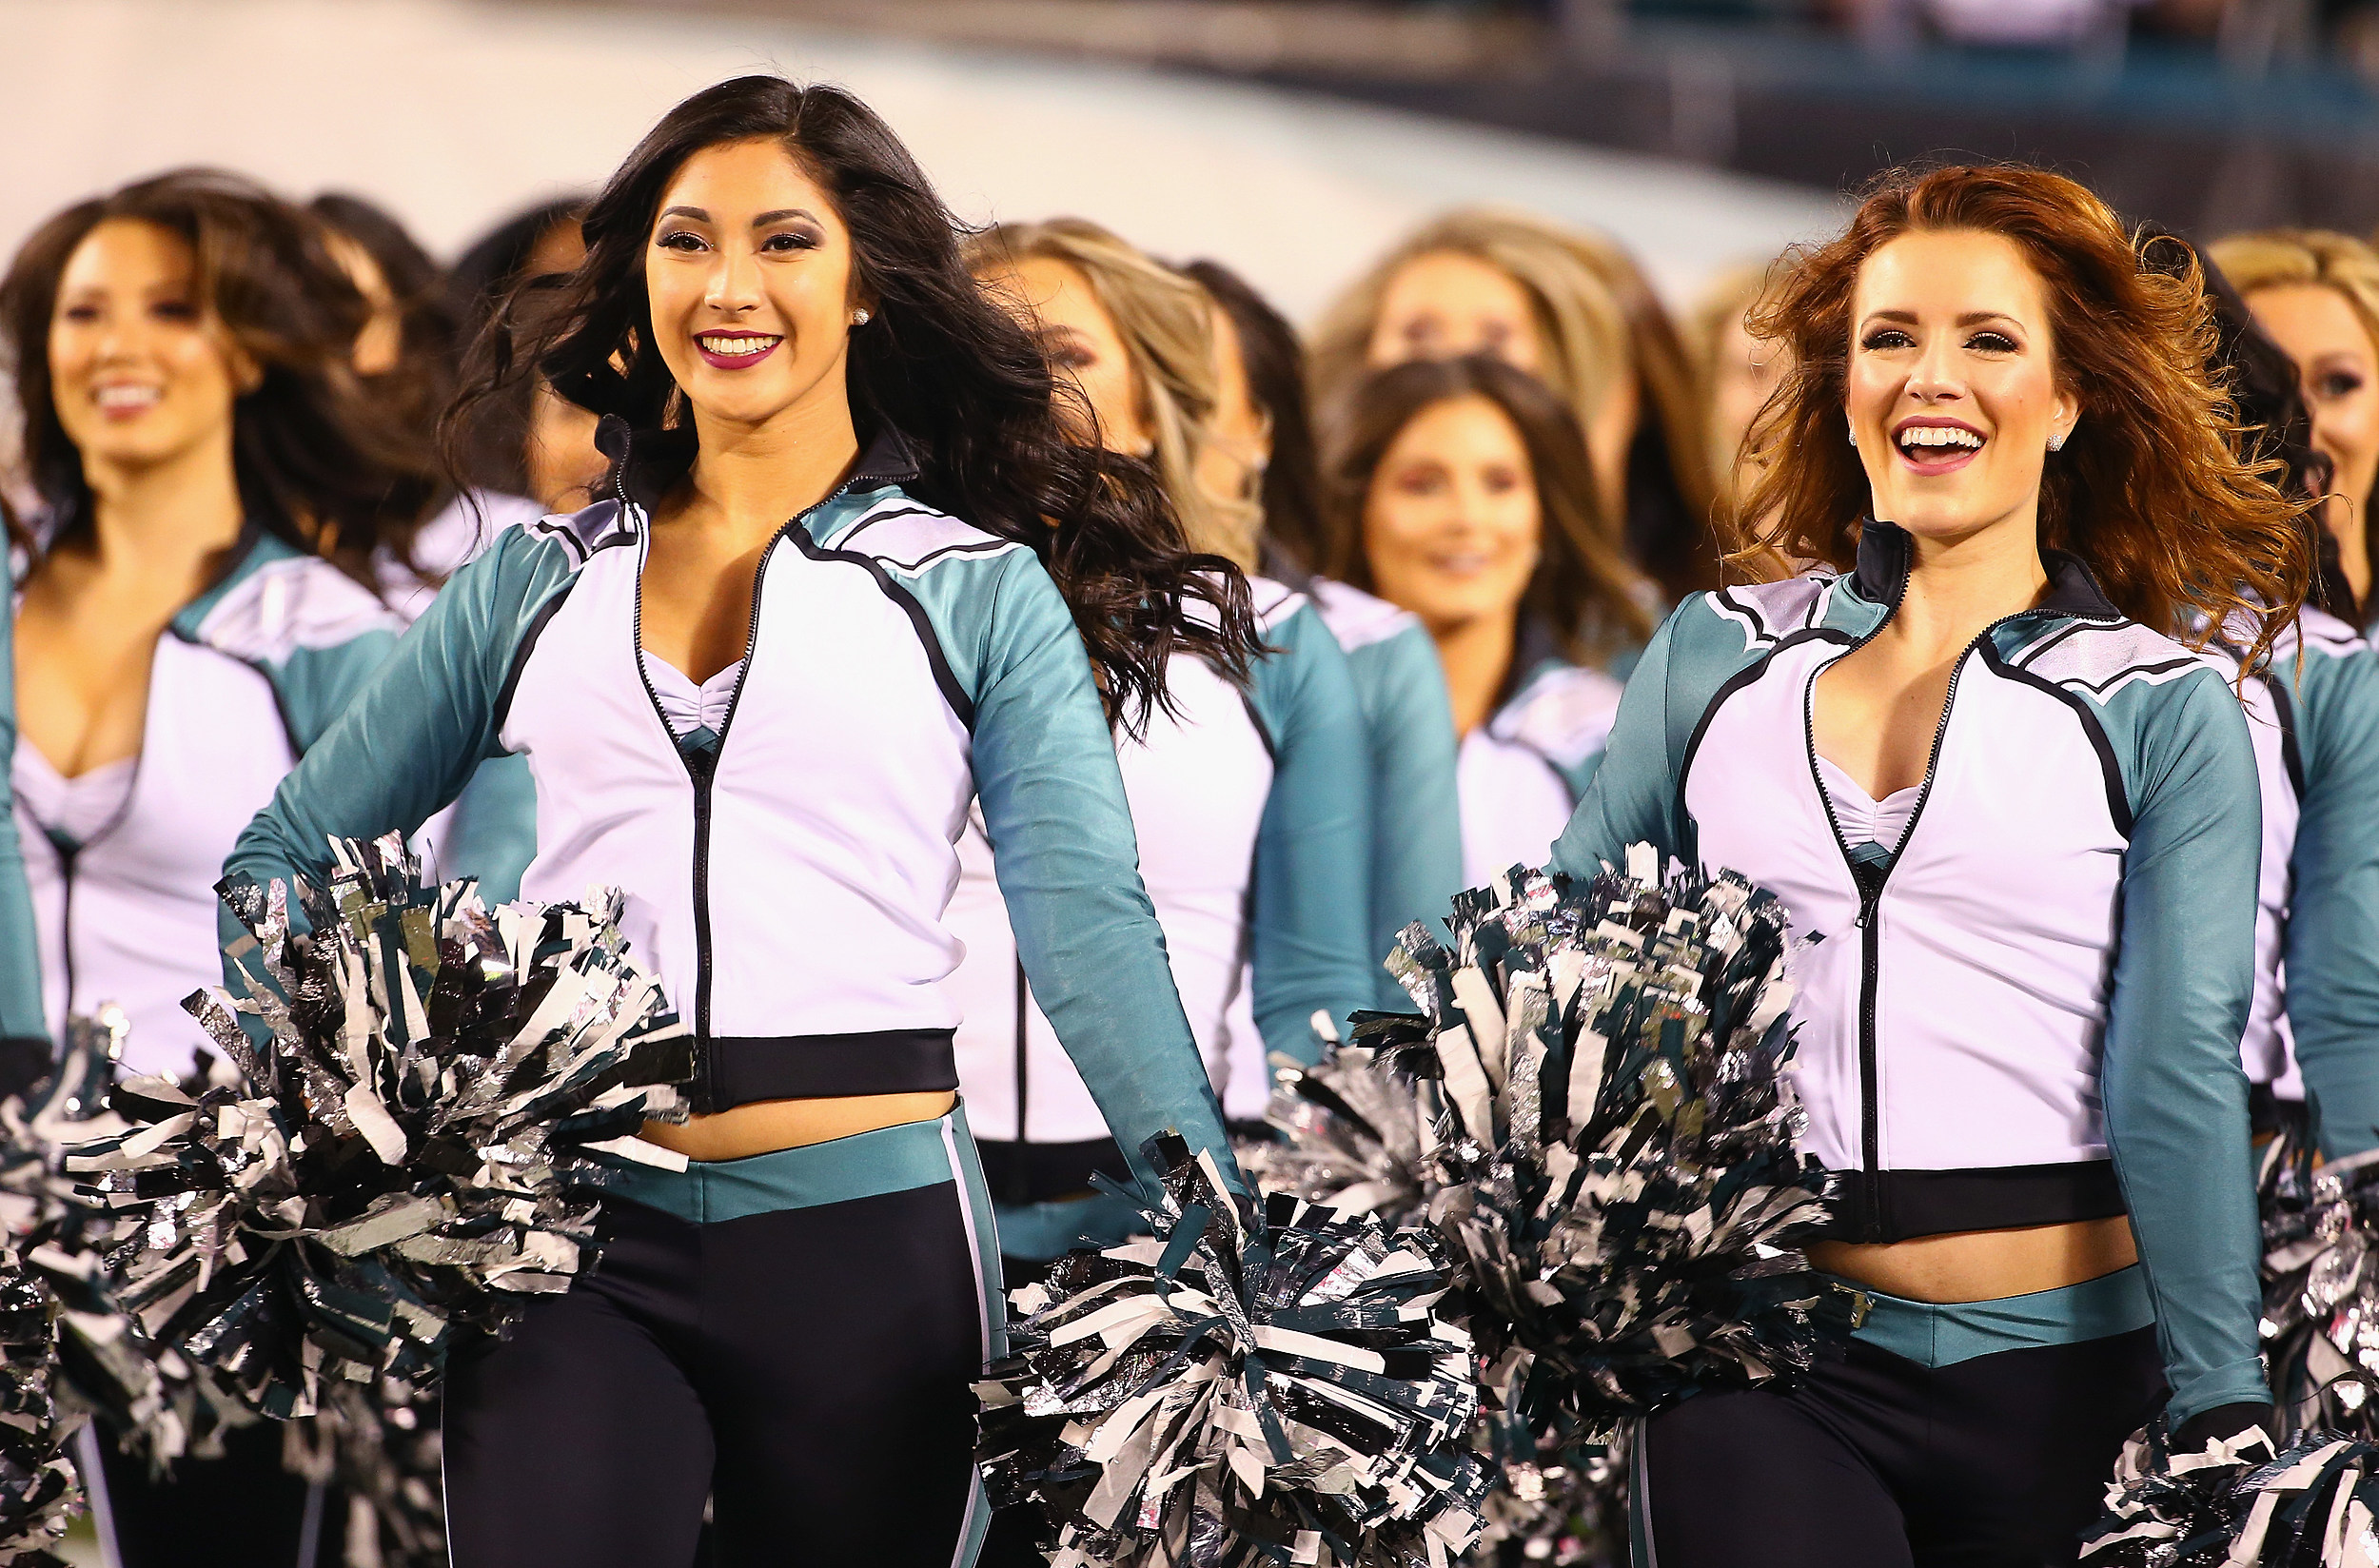 Last Call to Audition to Be a Philadelphia Eagles Cheerleader